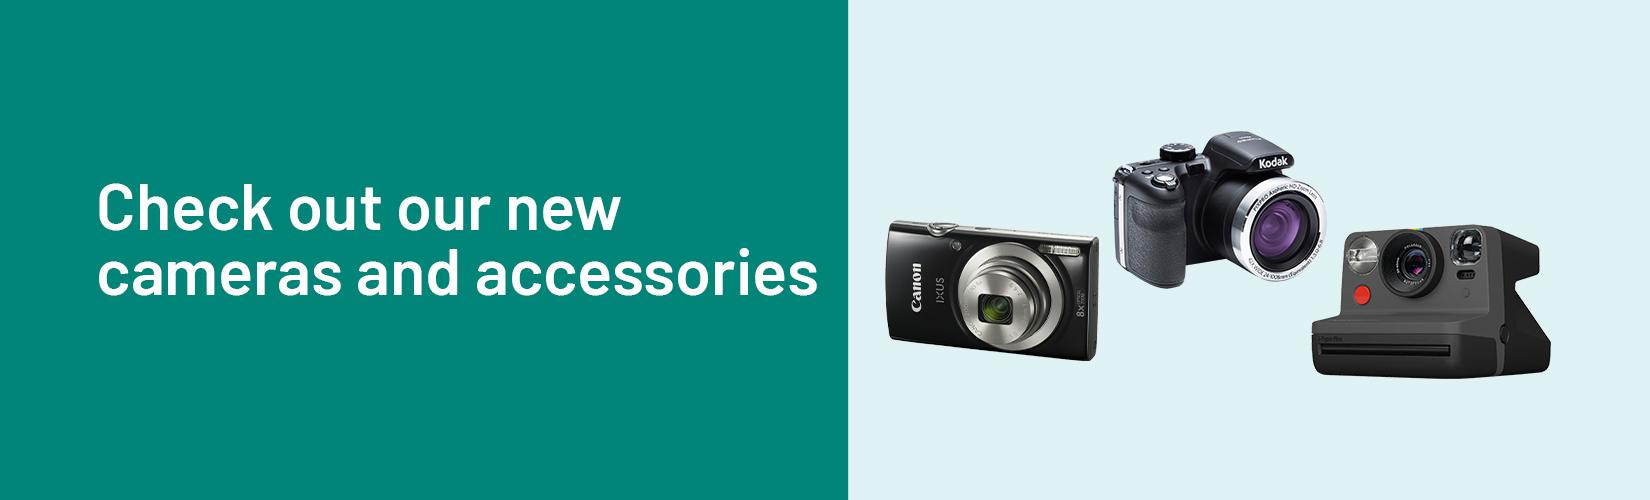 Check out our new cameras and accessories.